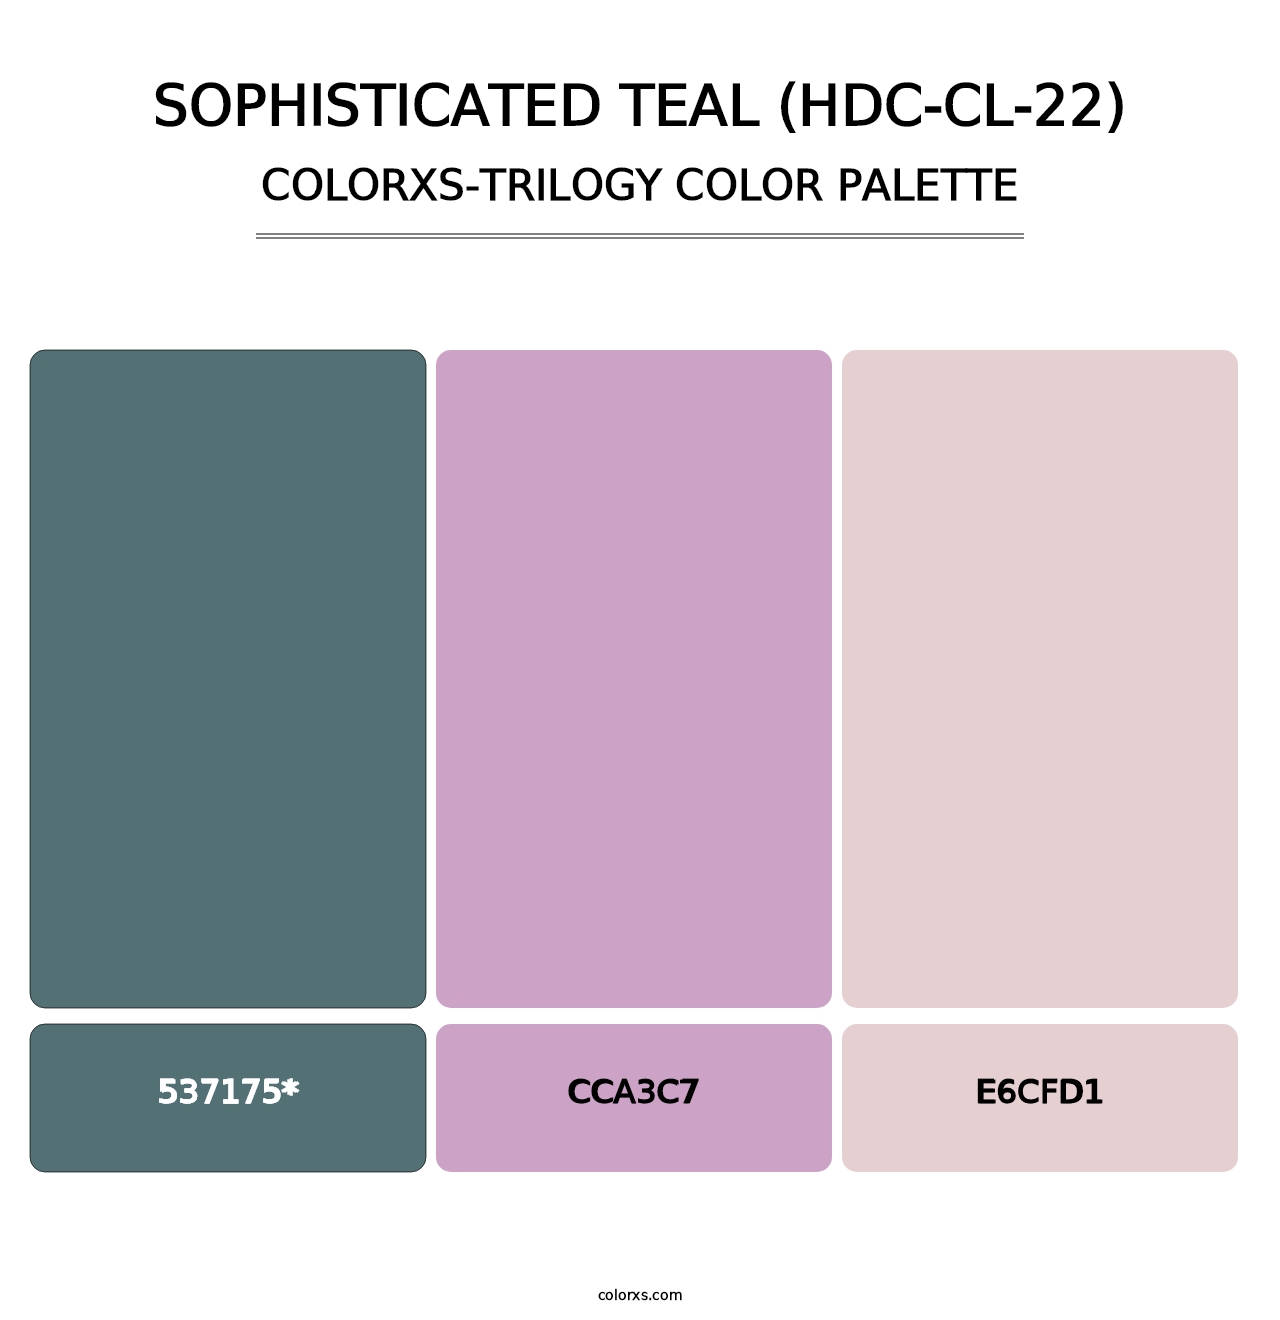 Sophisticated Teal (HDC-CL-22) - Colorxs Trilogy Palette